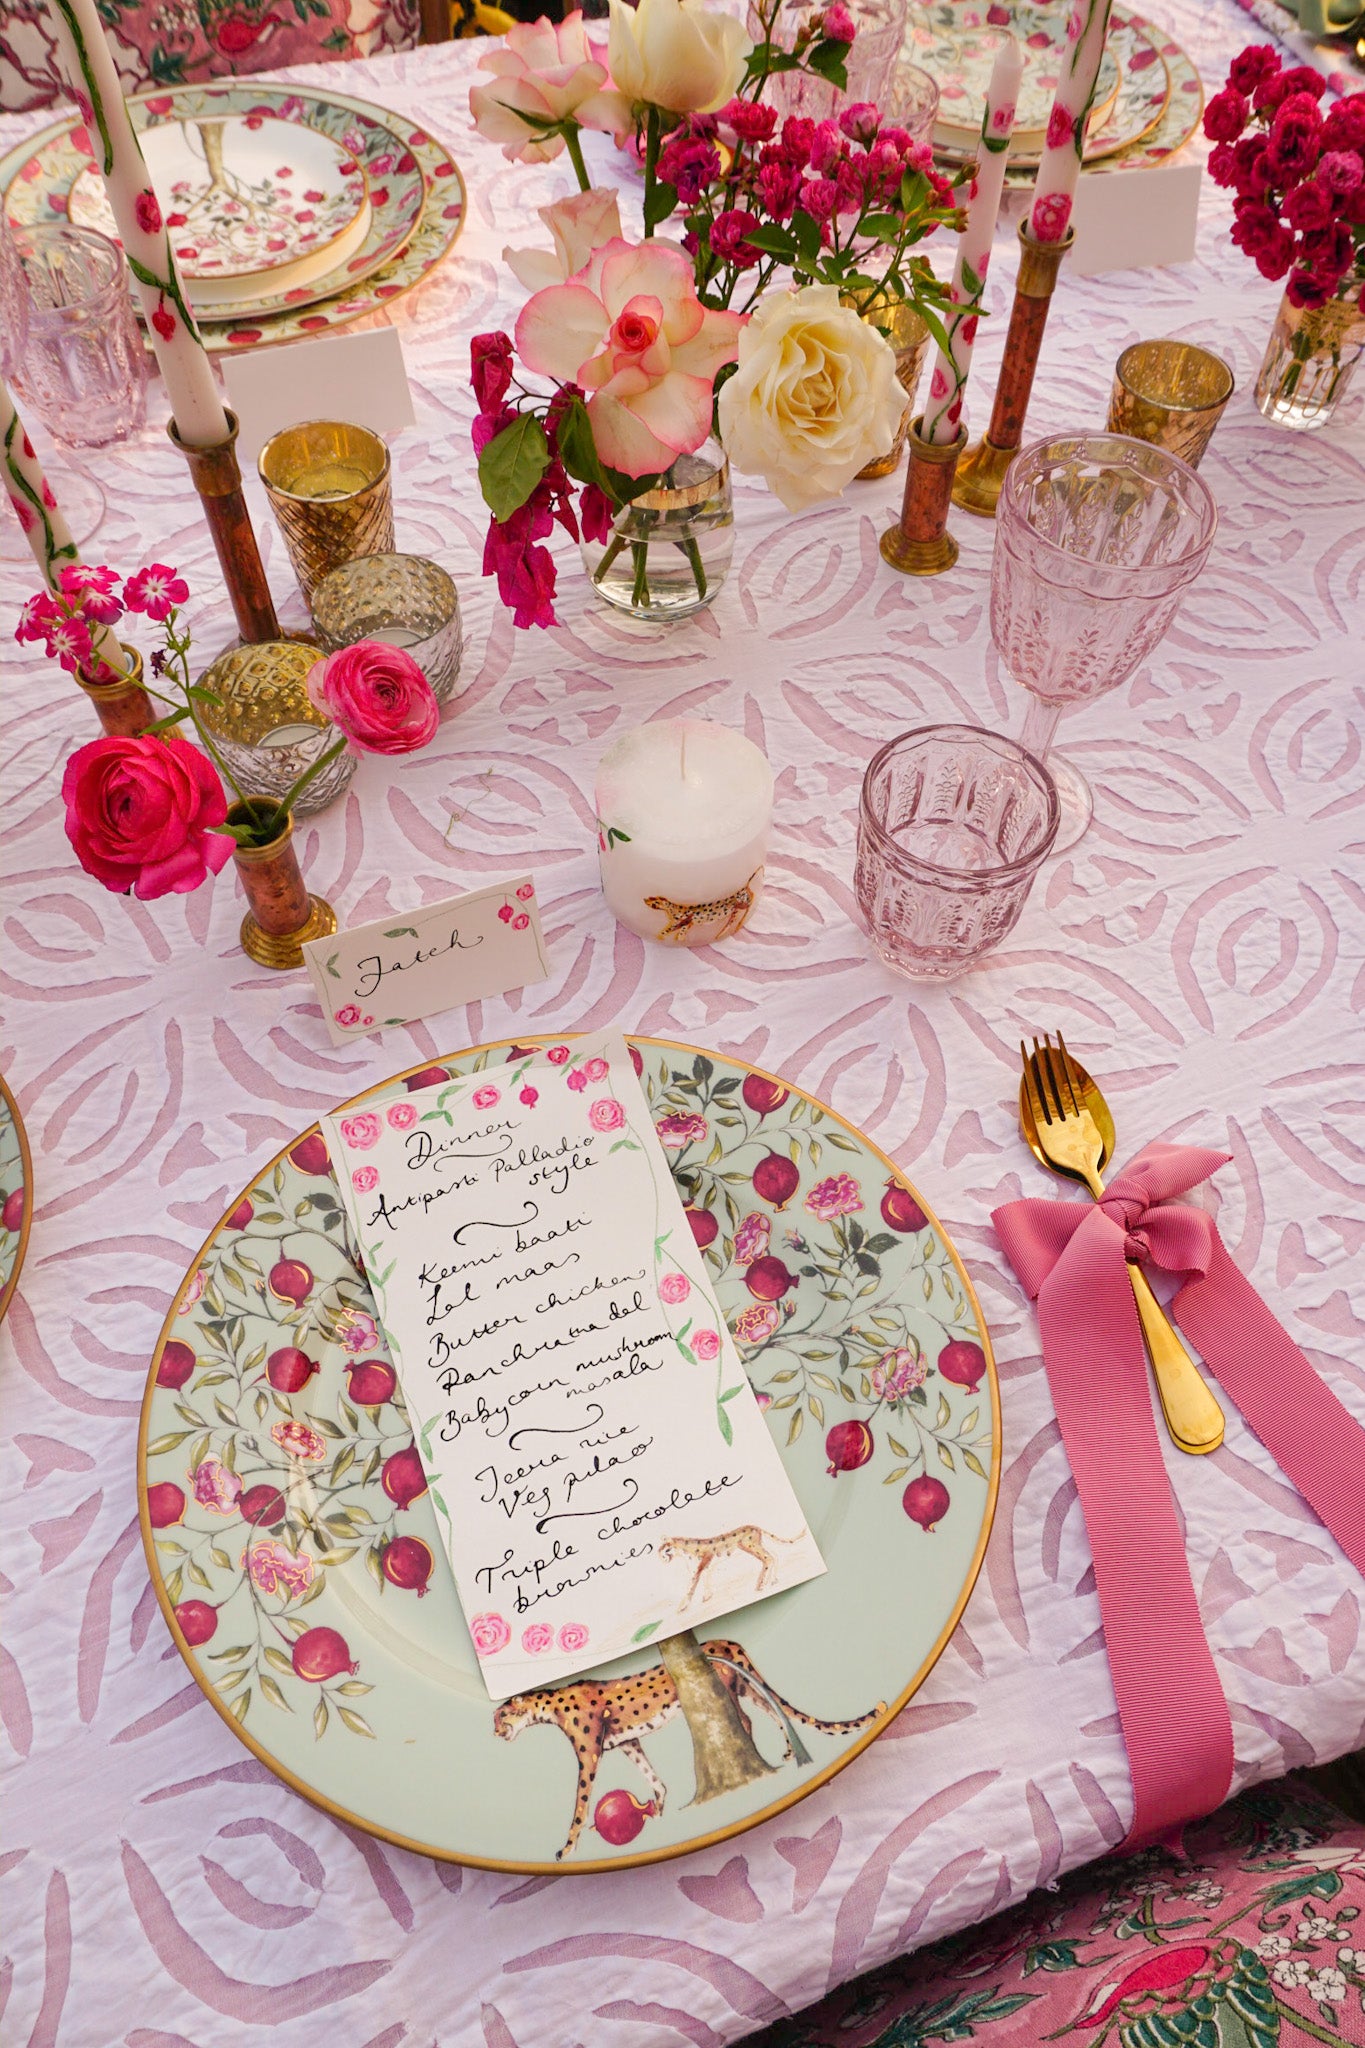 Painted menu by Rosanna Falconer for Good Earth